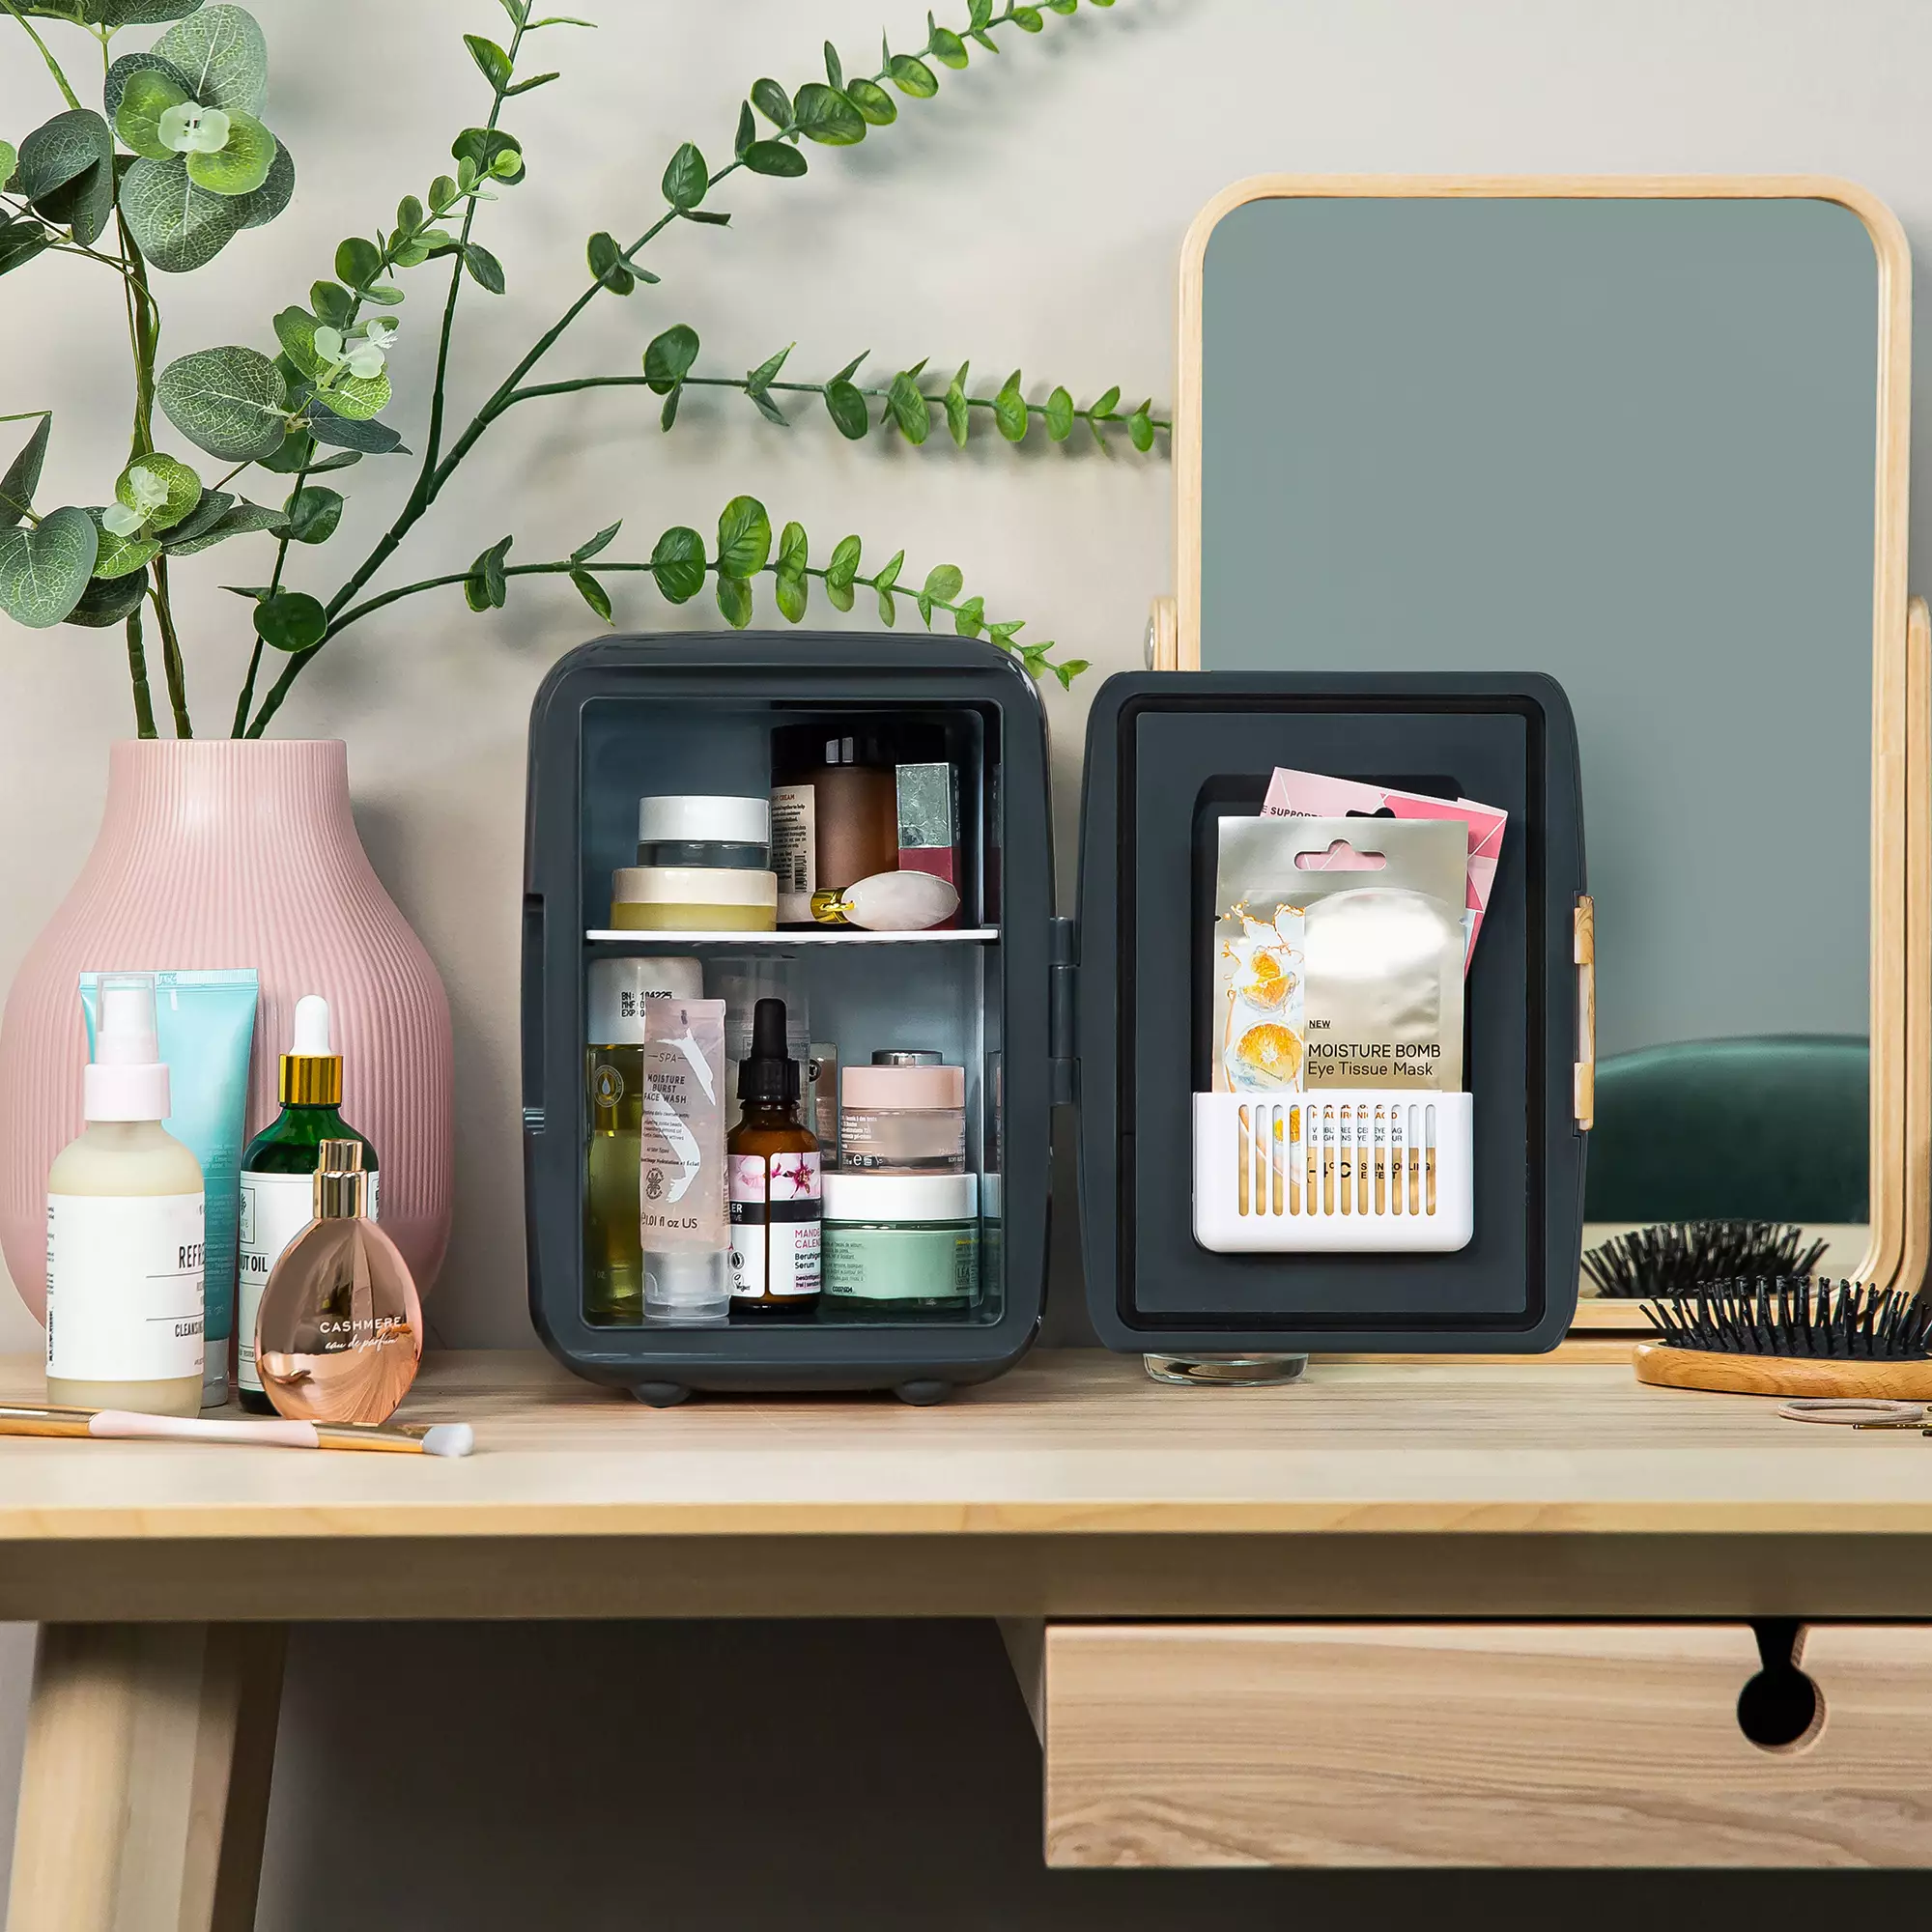 The mini-fridge is perfect for storing your make-up (